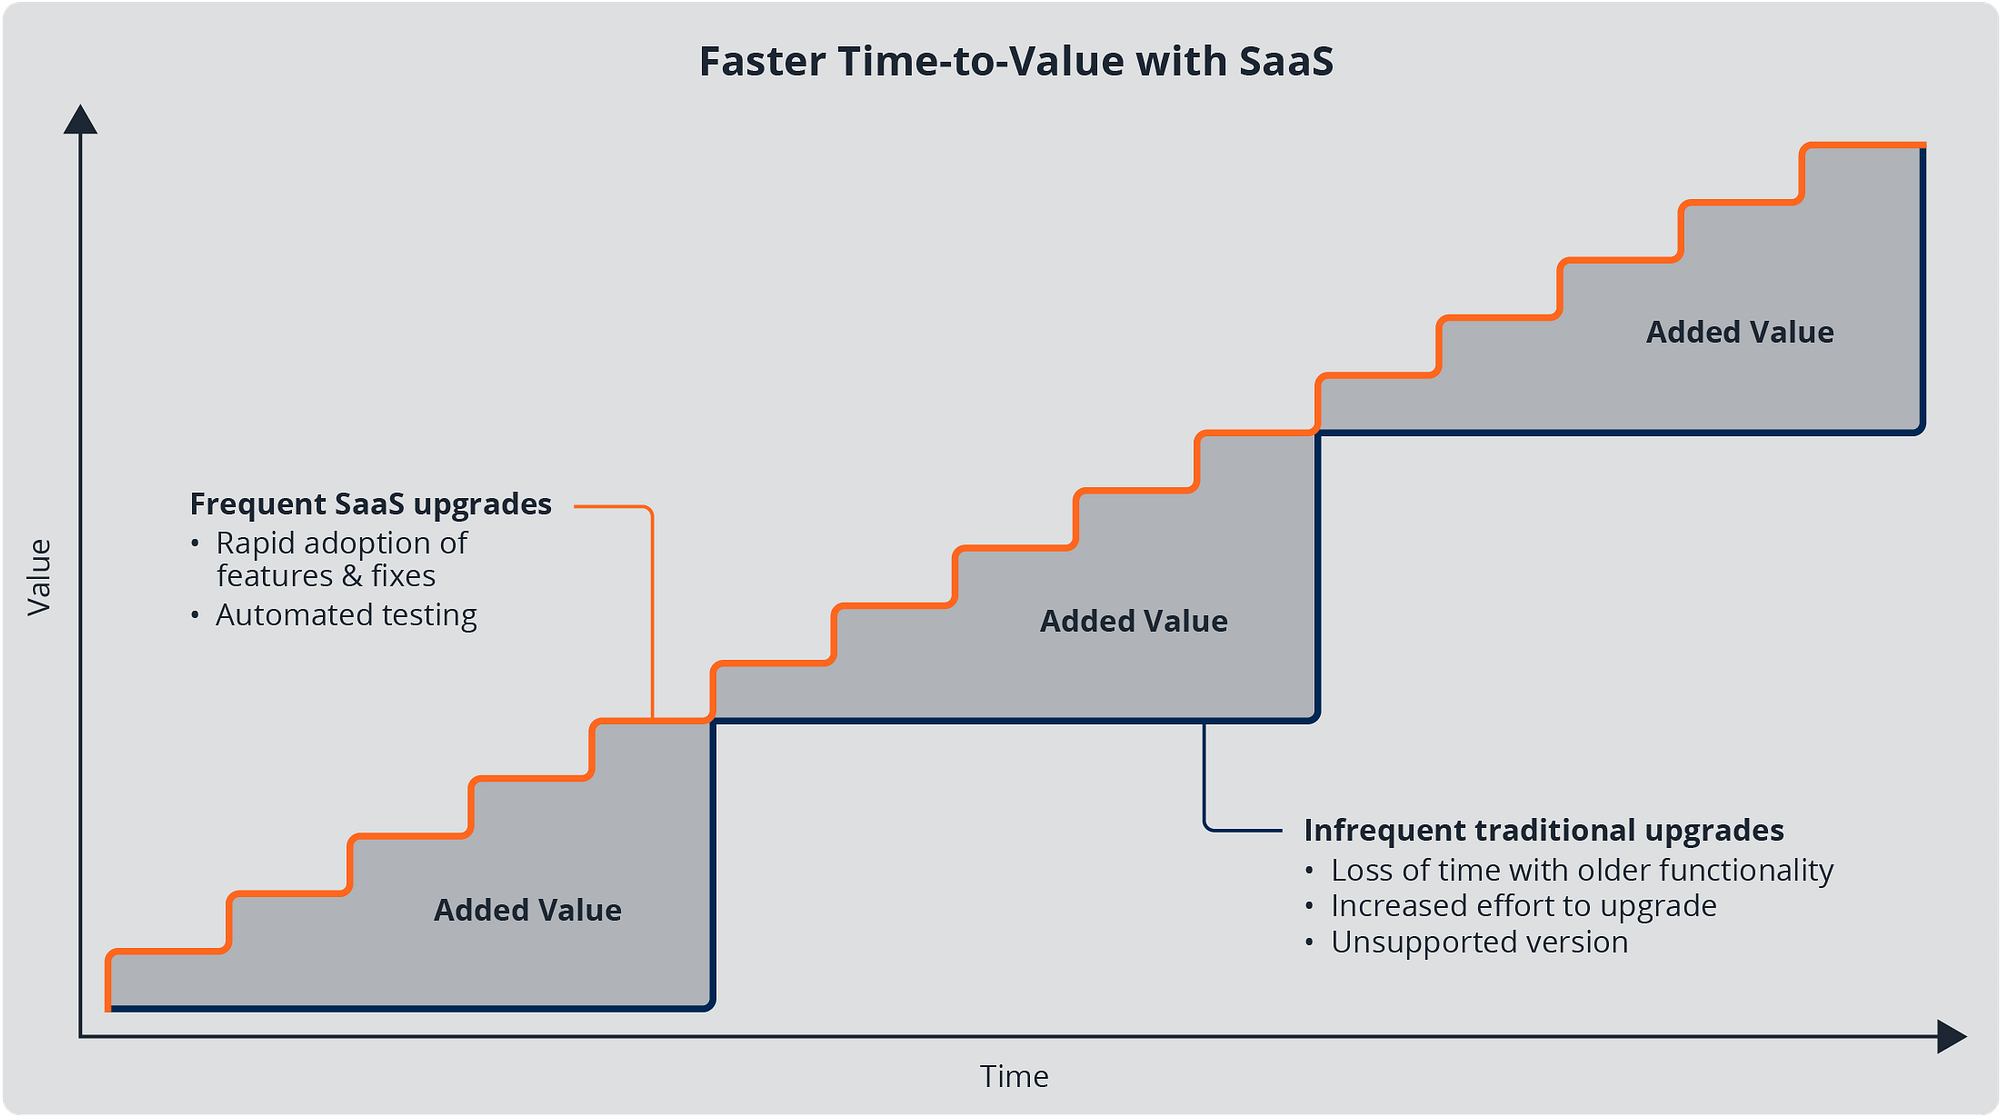 Faster Time-to-Value with SaaS